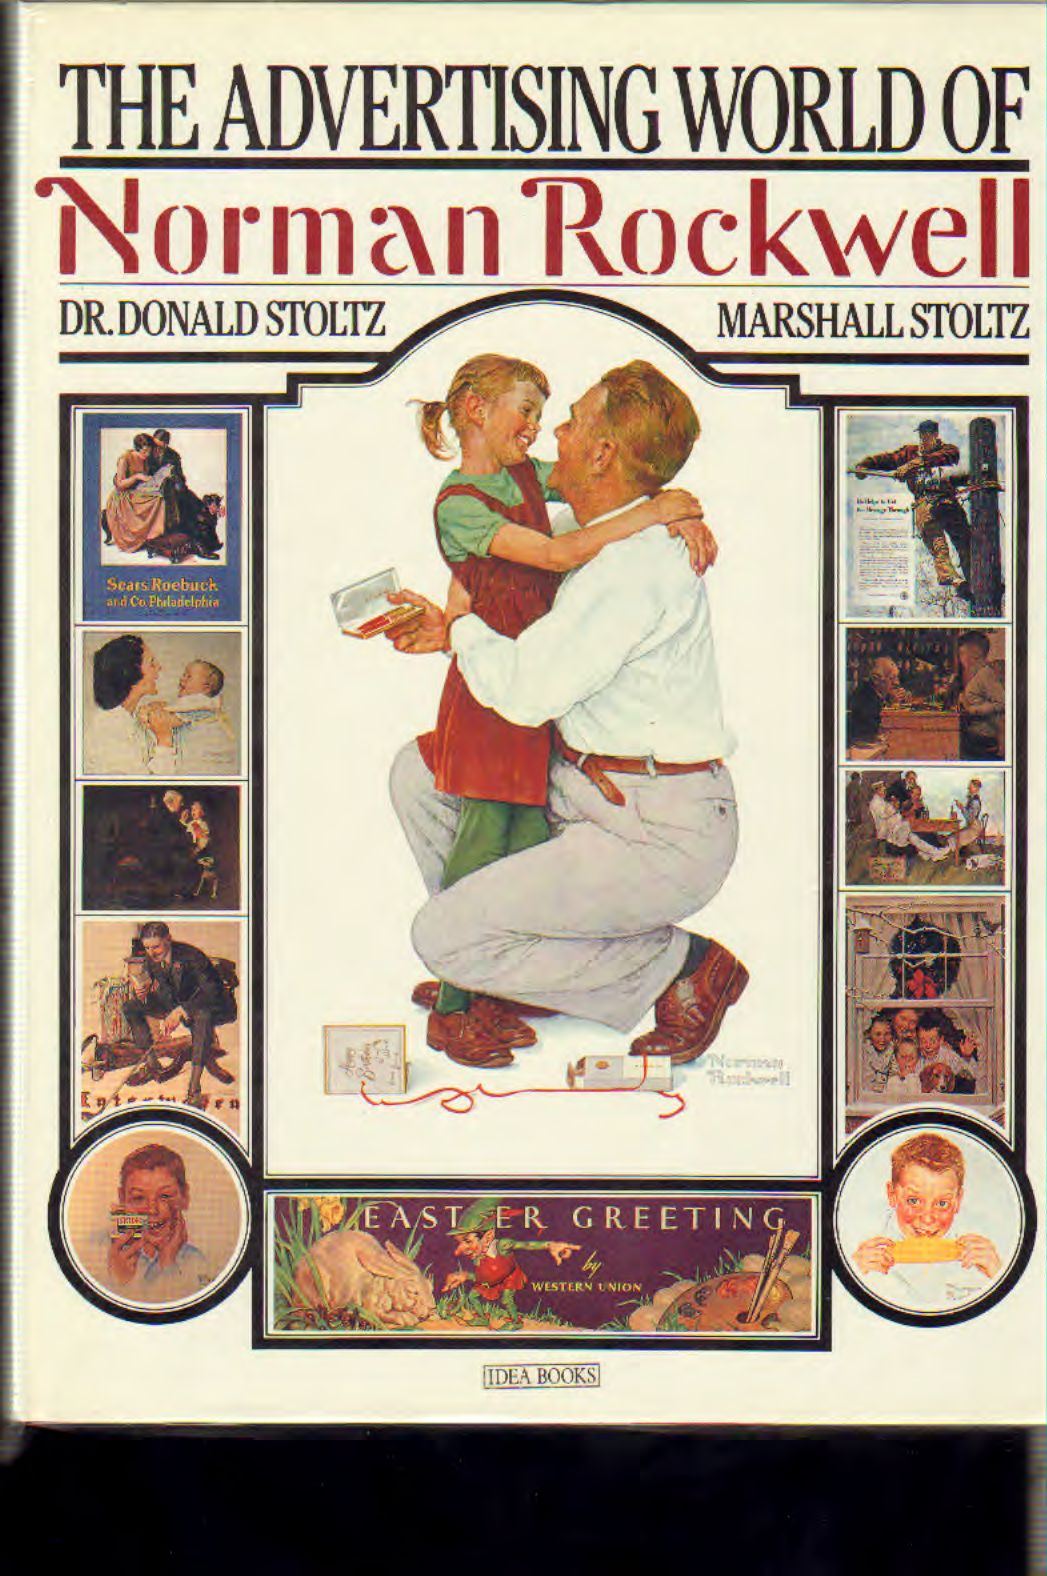 Rockwell - The advertising of Norman Rockwell